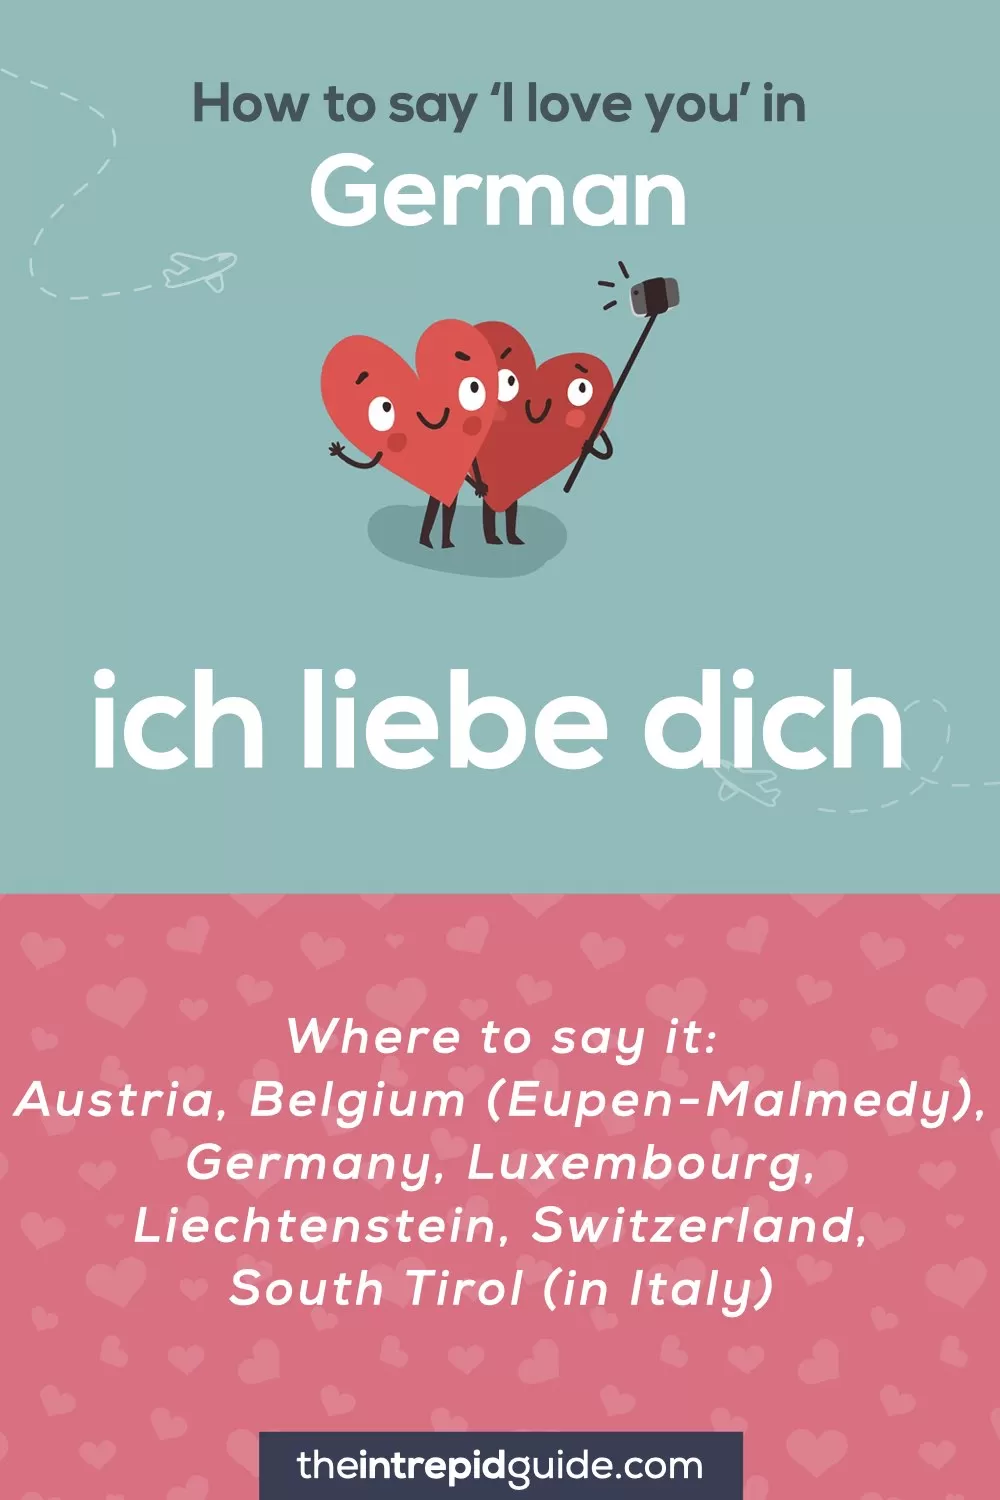 How to say I love you in different languages - German - ich liebe dich